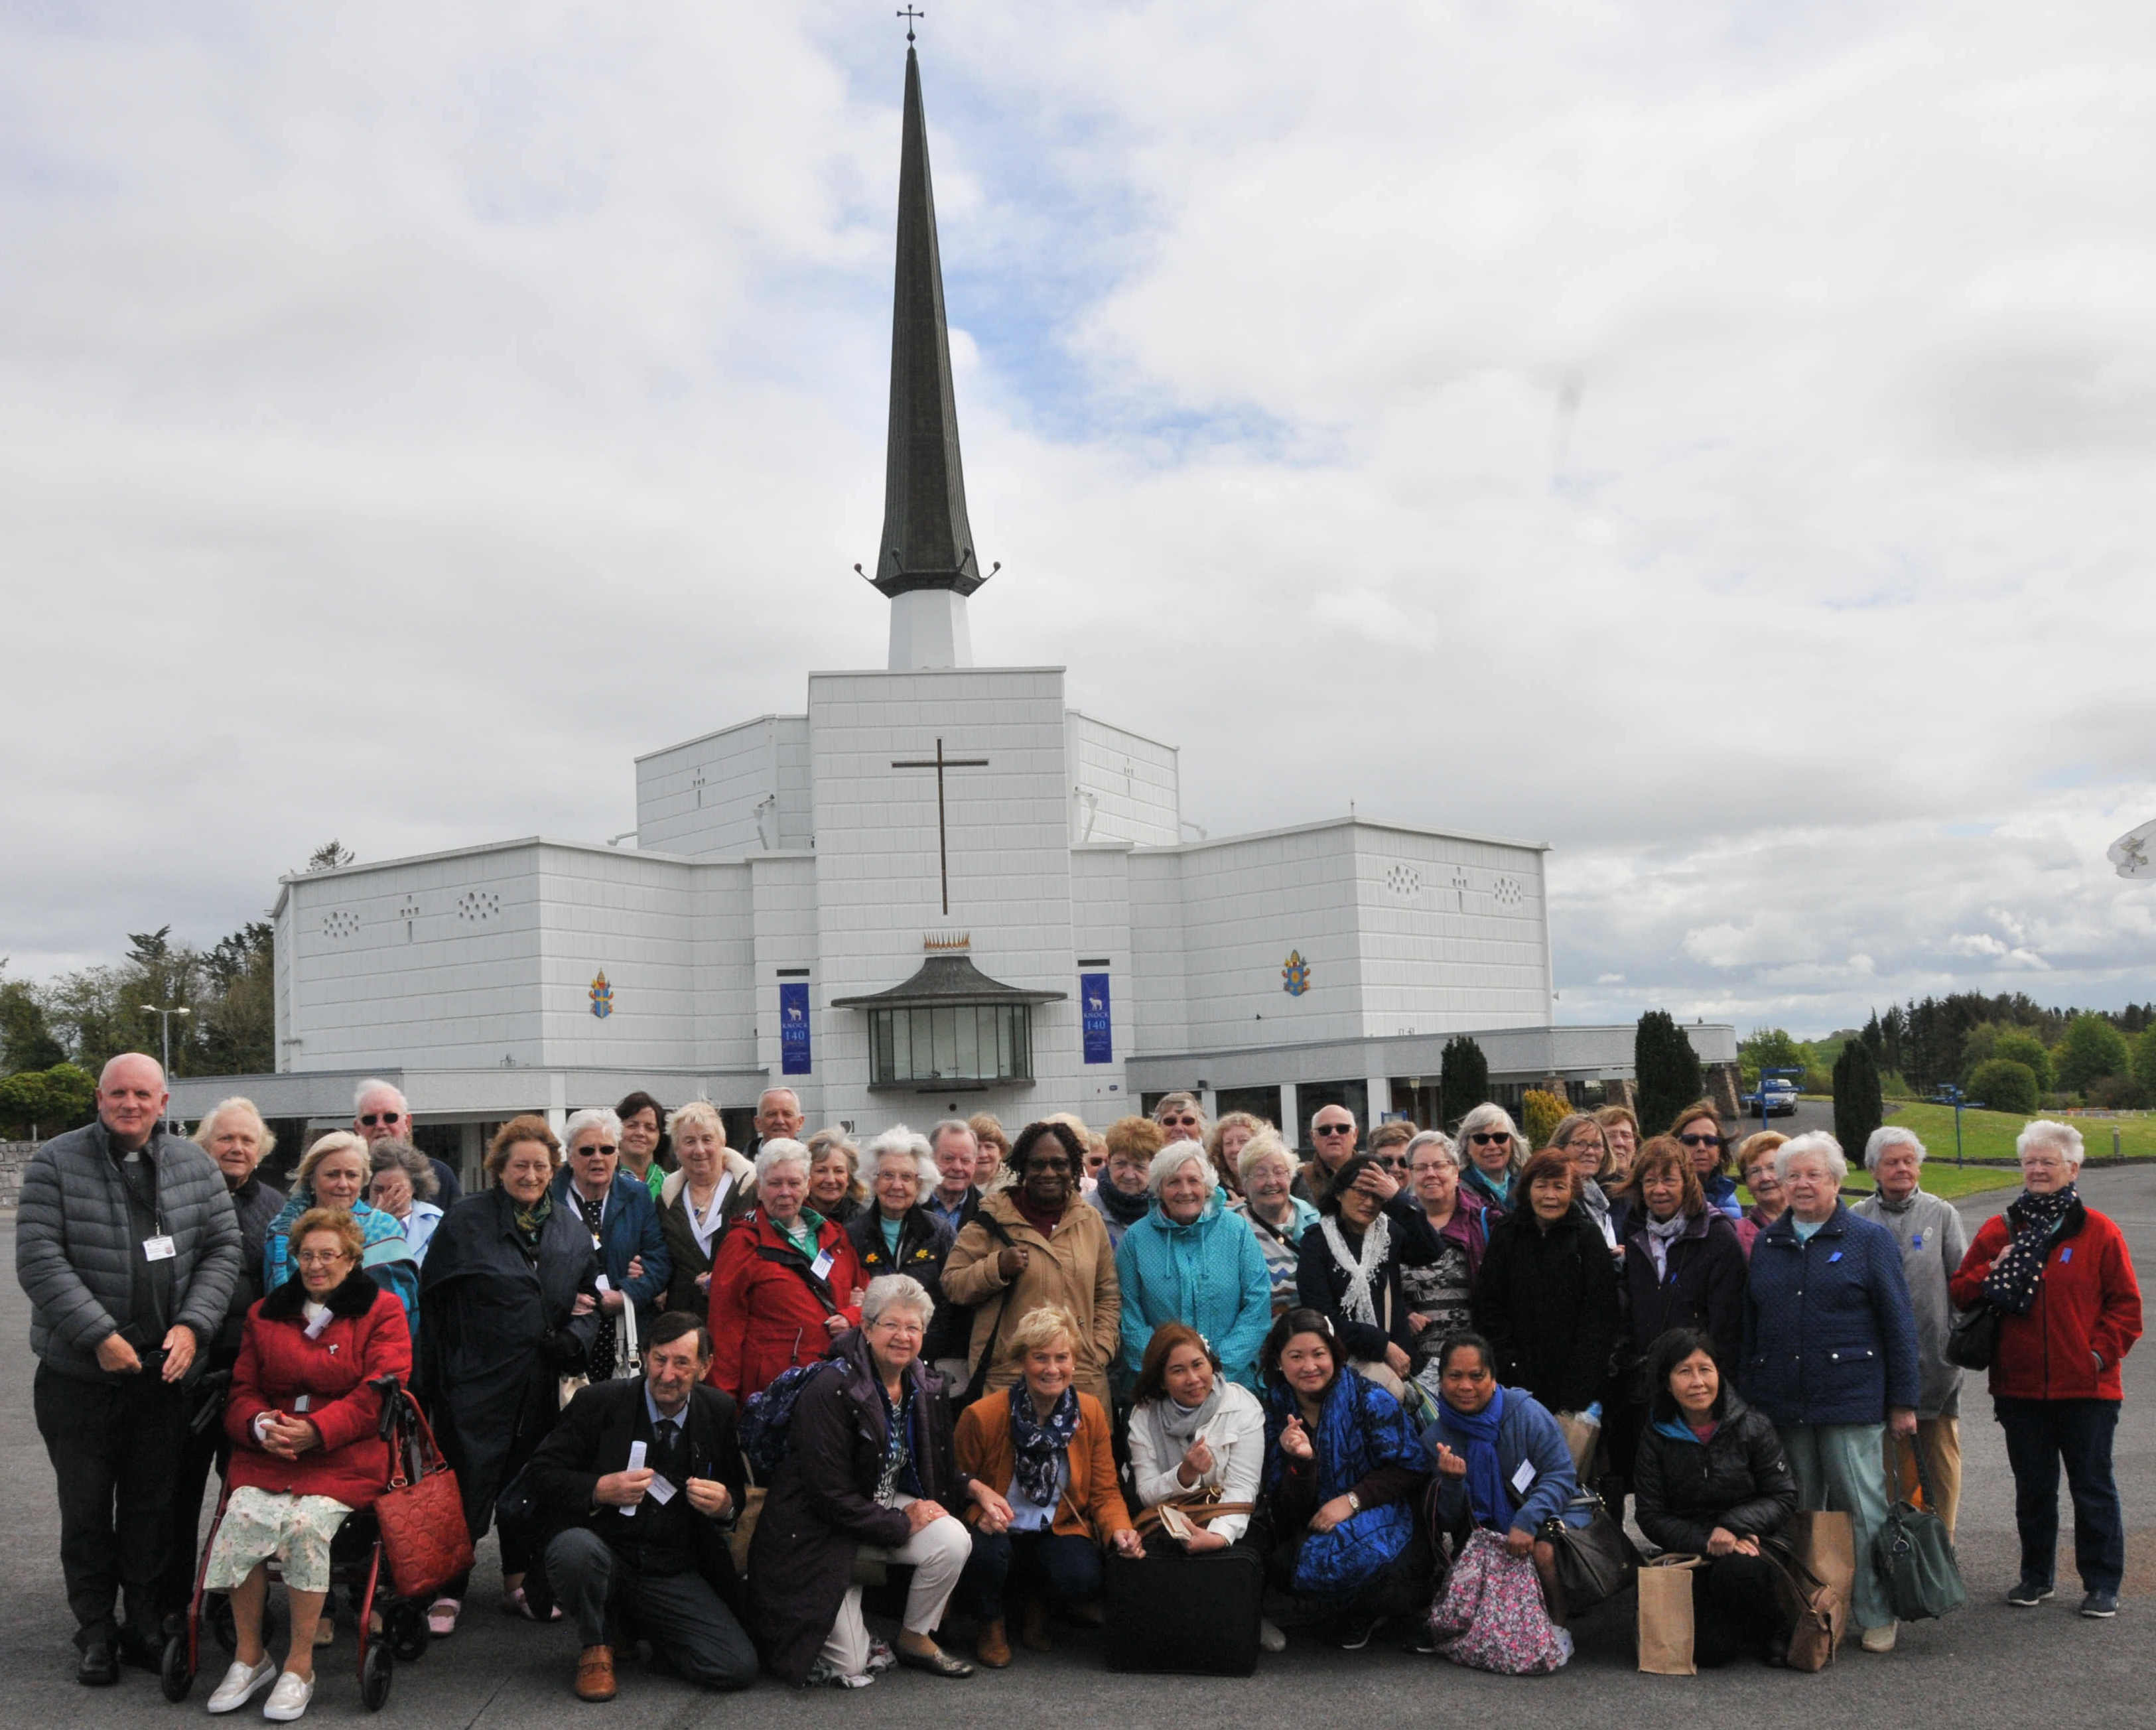 Pilgrims who visited Knock for the 140th anniversary of the Apparition of the Virgin Mary